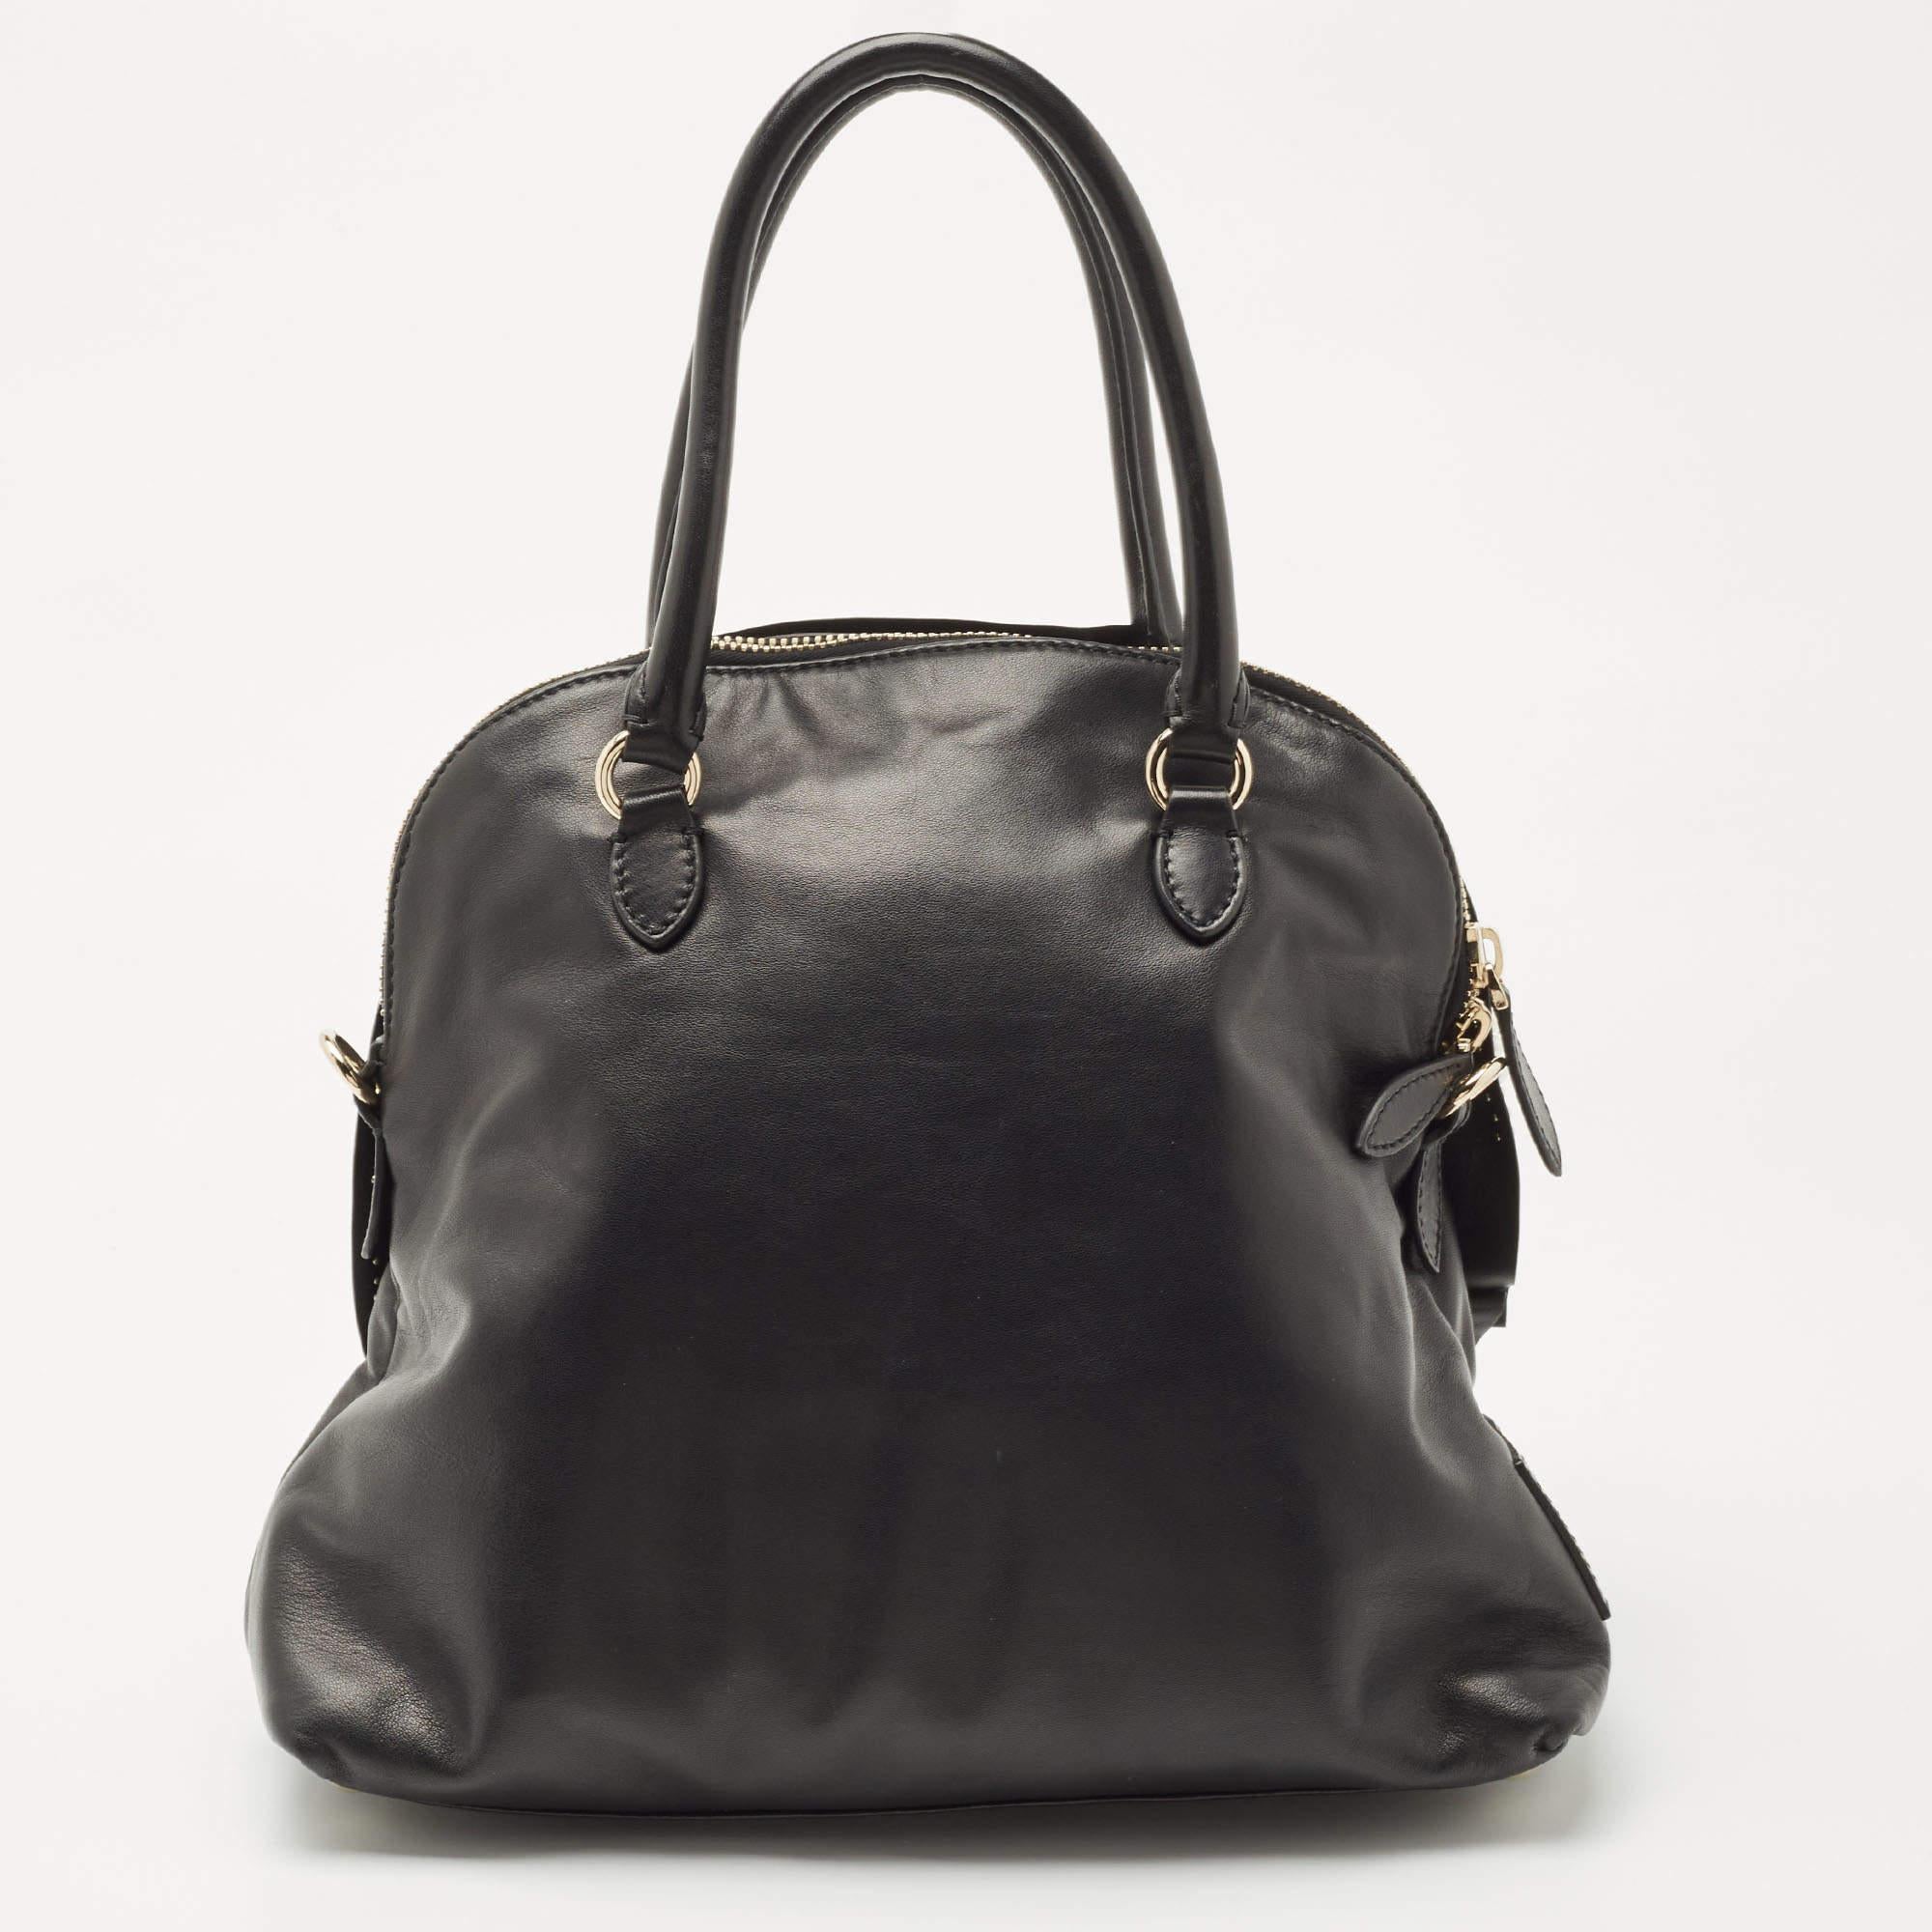 Bags like these are hard to come by, so quickly grab one when you can! Crafted from leather, this bag by Valentino features a beautiful rose detailing on the front. Equipped with dual handles, it has a satin-lined interior sized to hold your daily